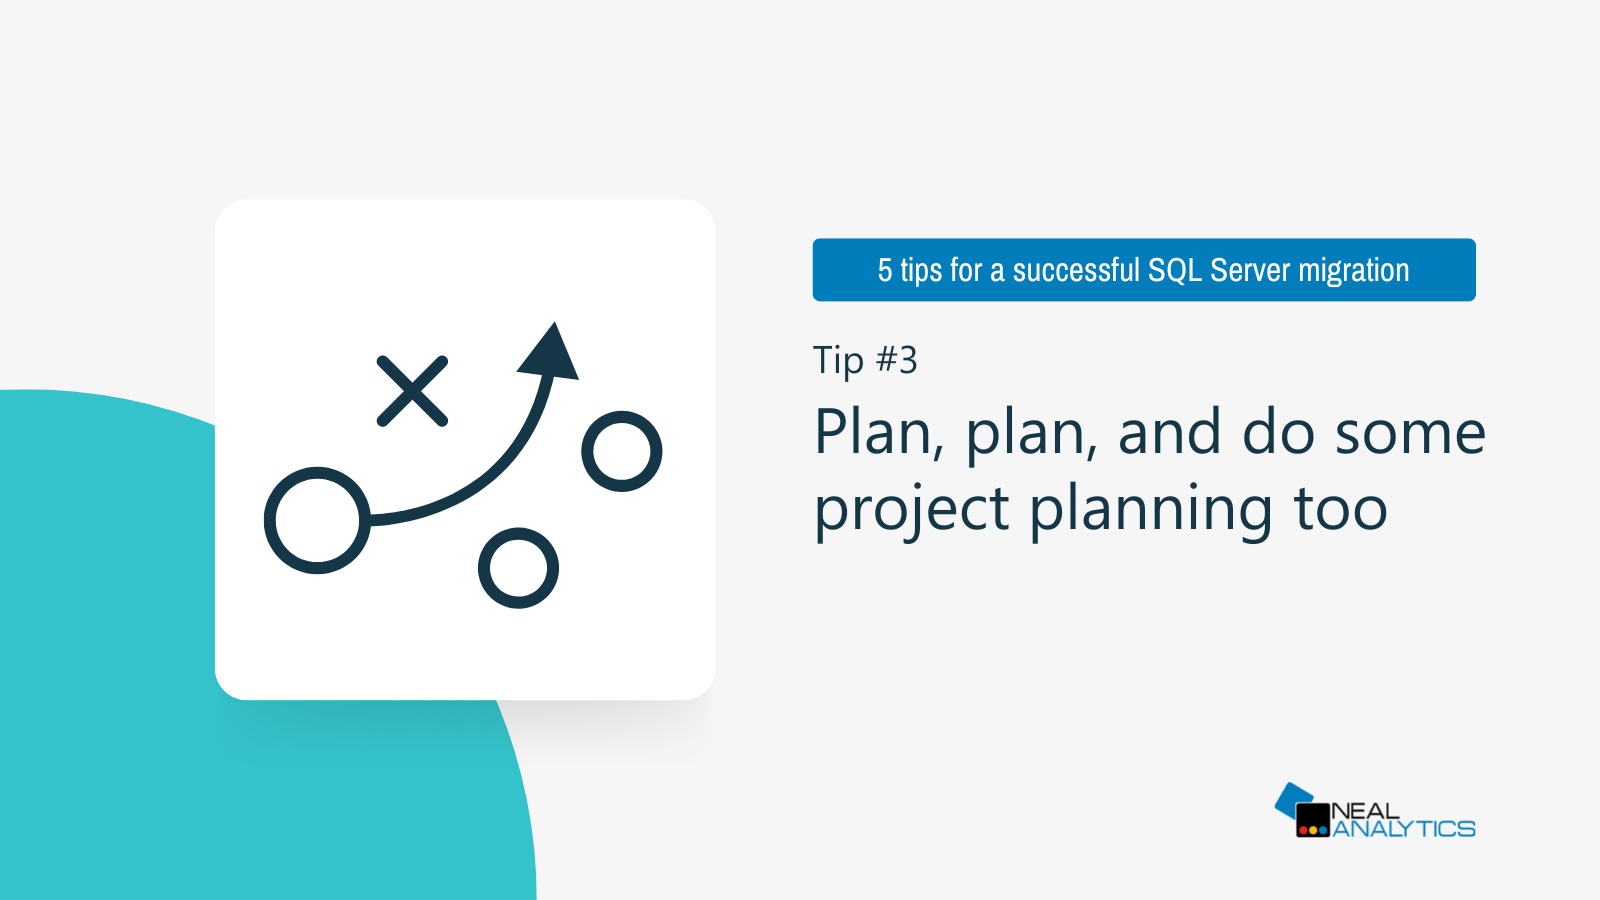 SQL Server migration tip 3: Plan, plan, and do some project planning too